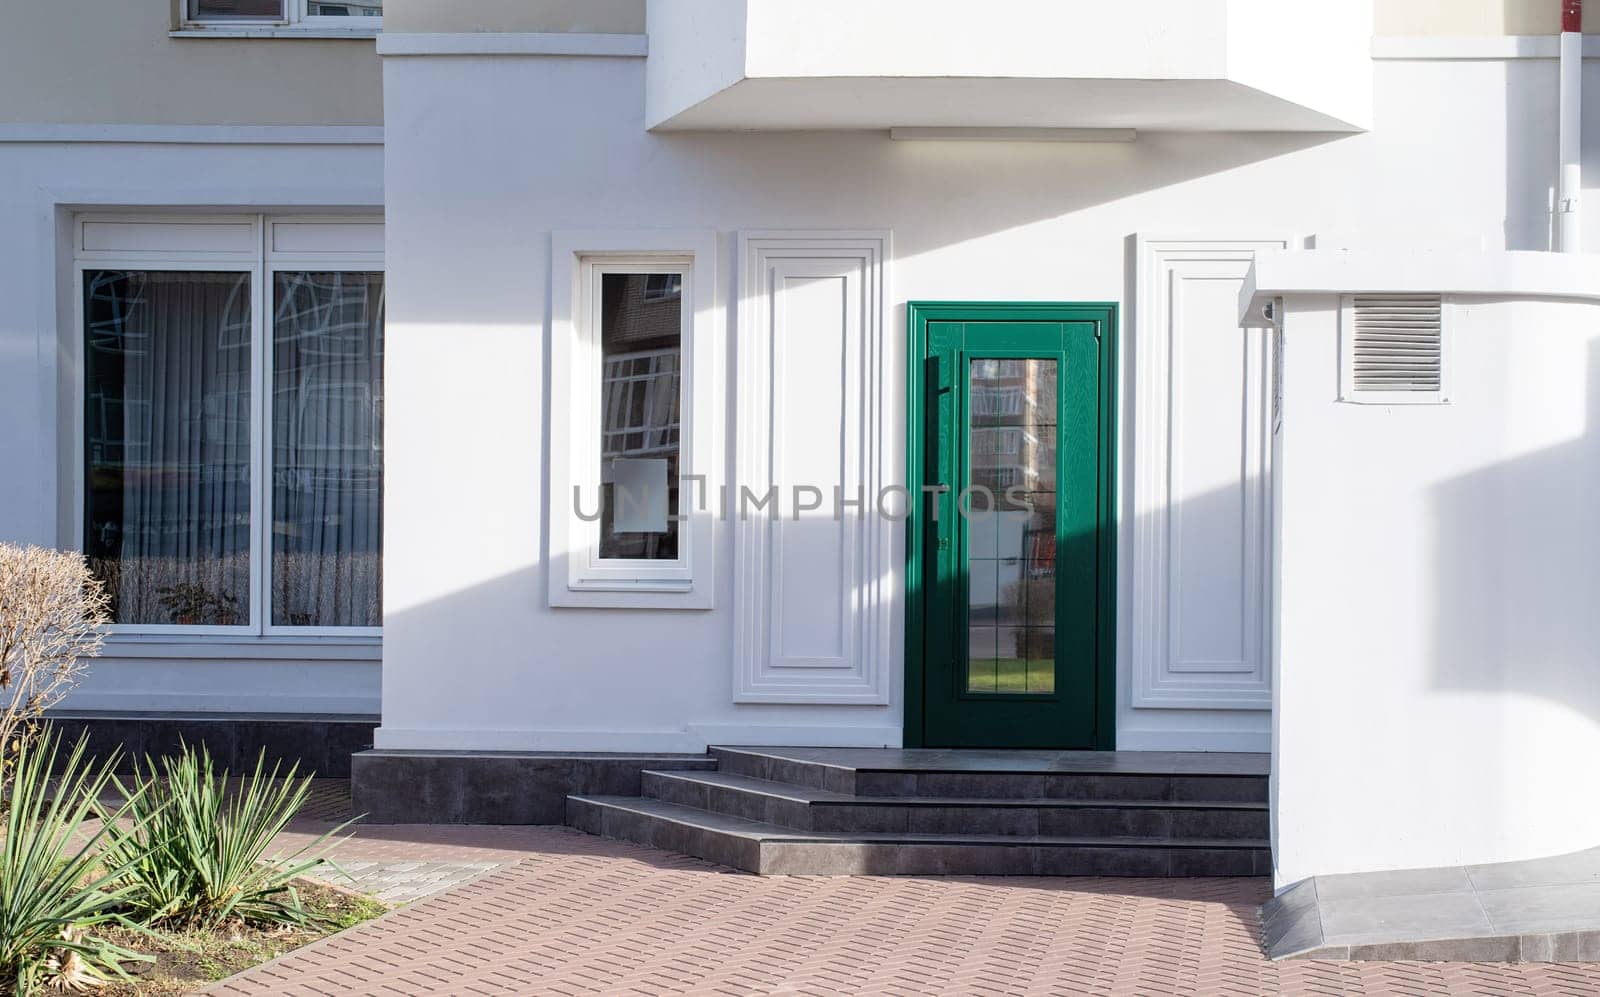 establishment exterior with white walls and green door, mockup design, shadow overlay